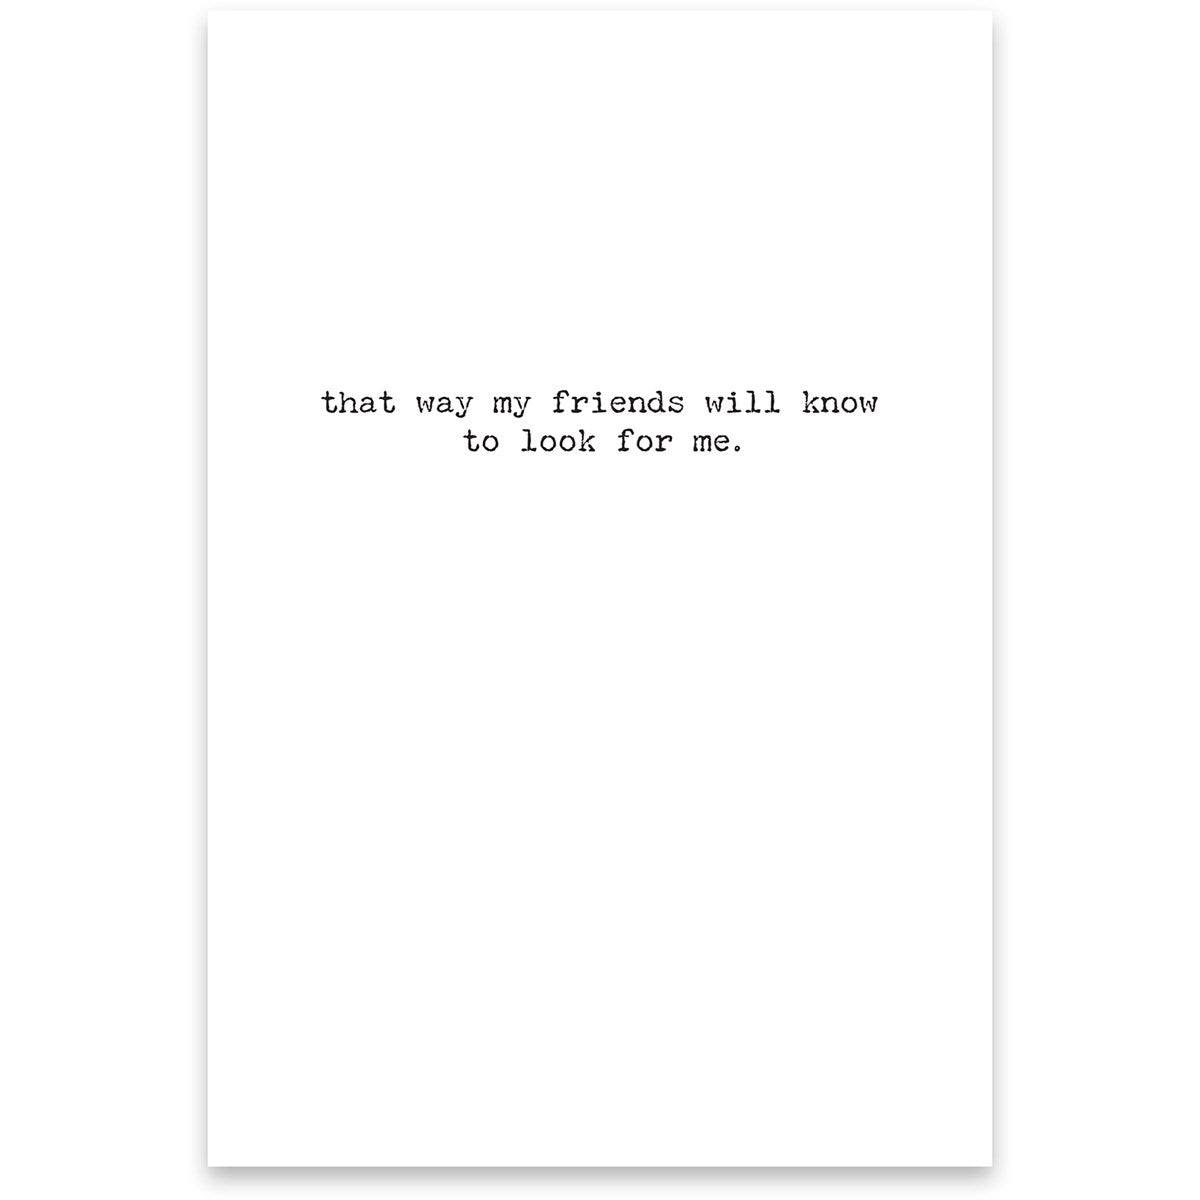 Go Missing Greeting Card